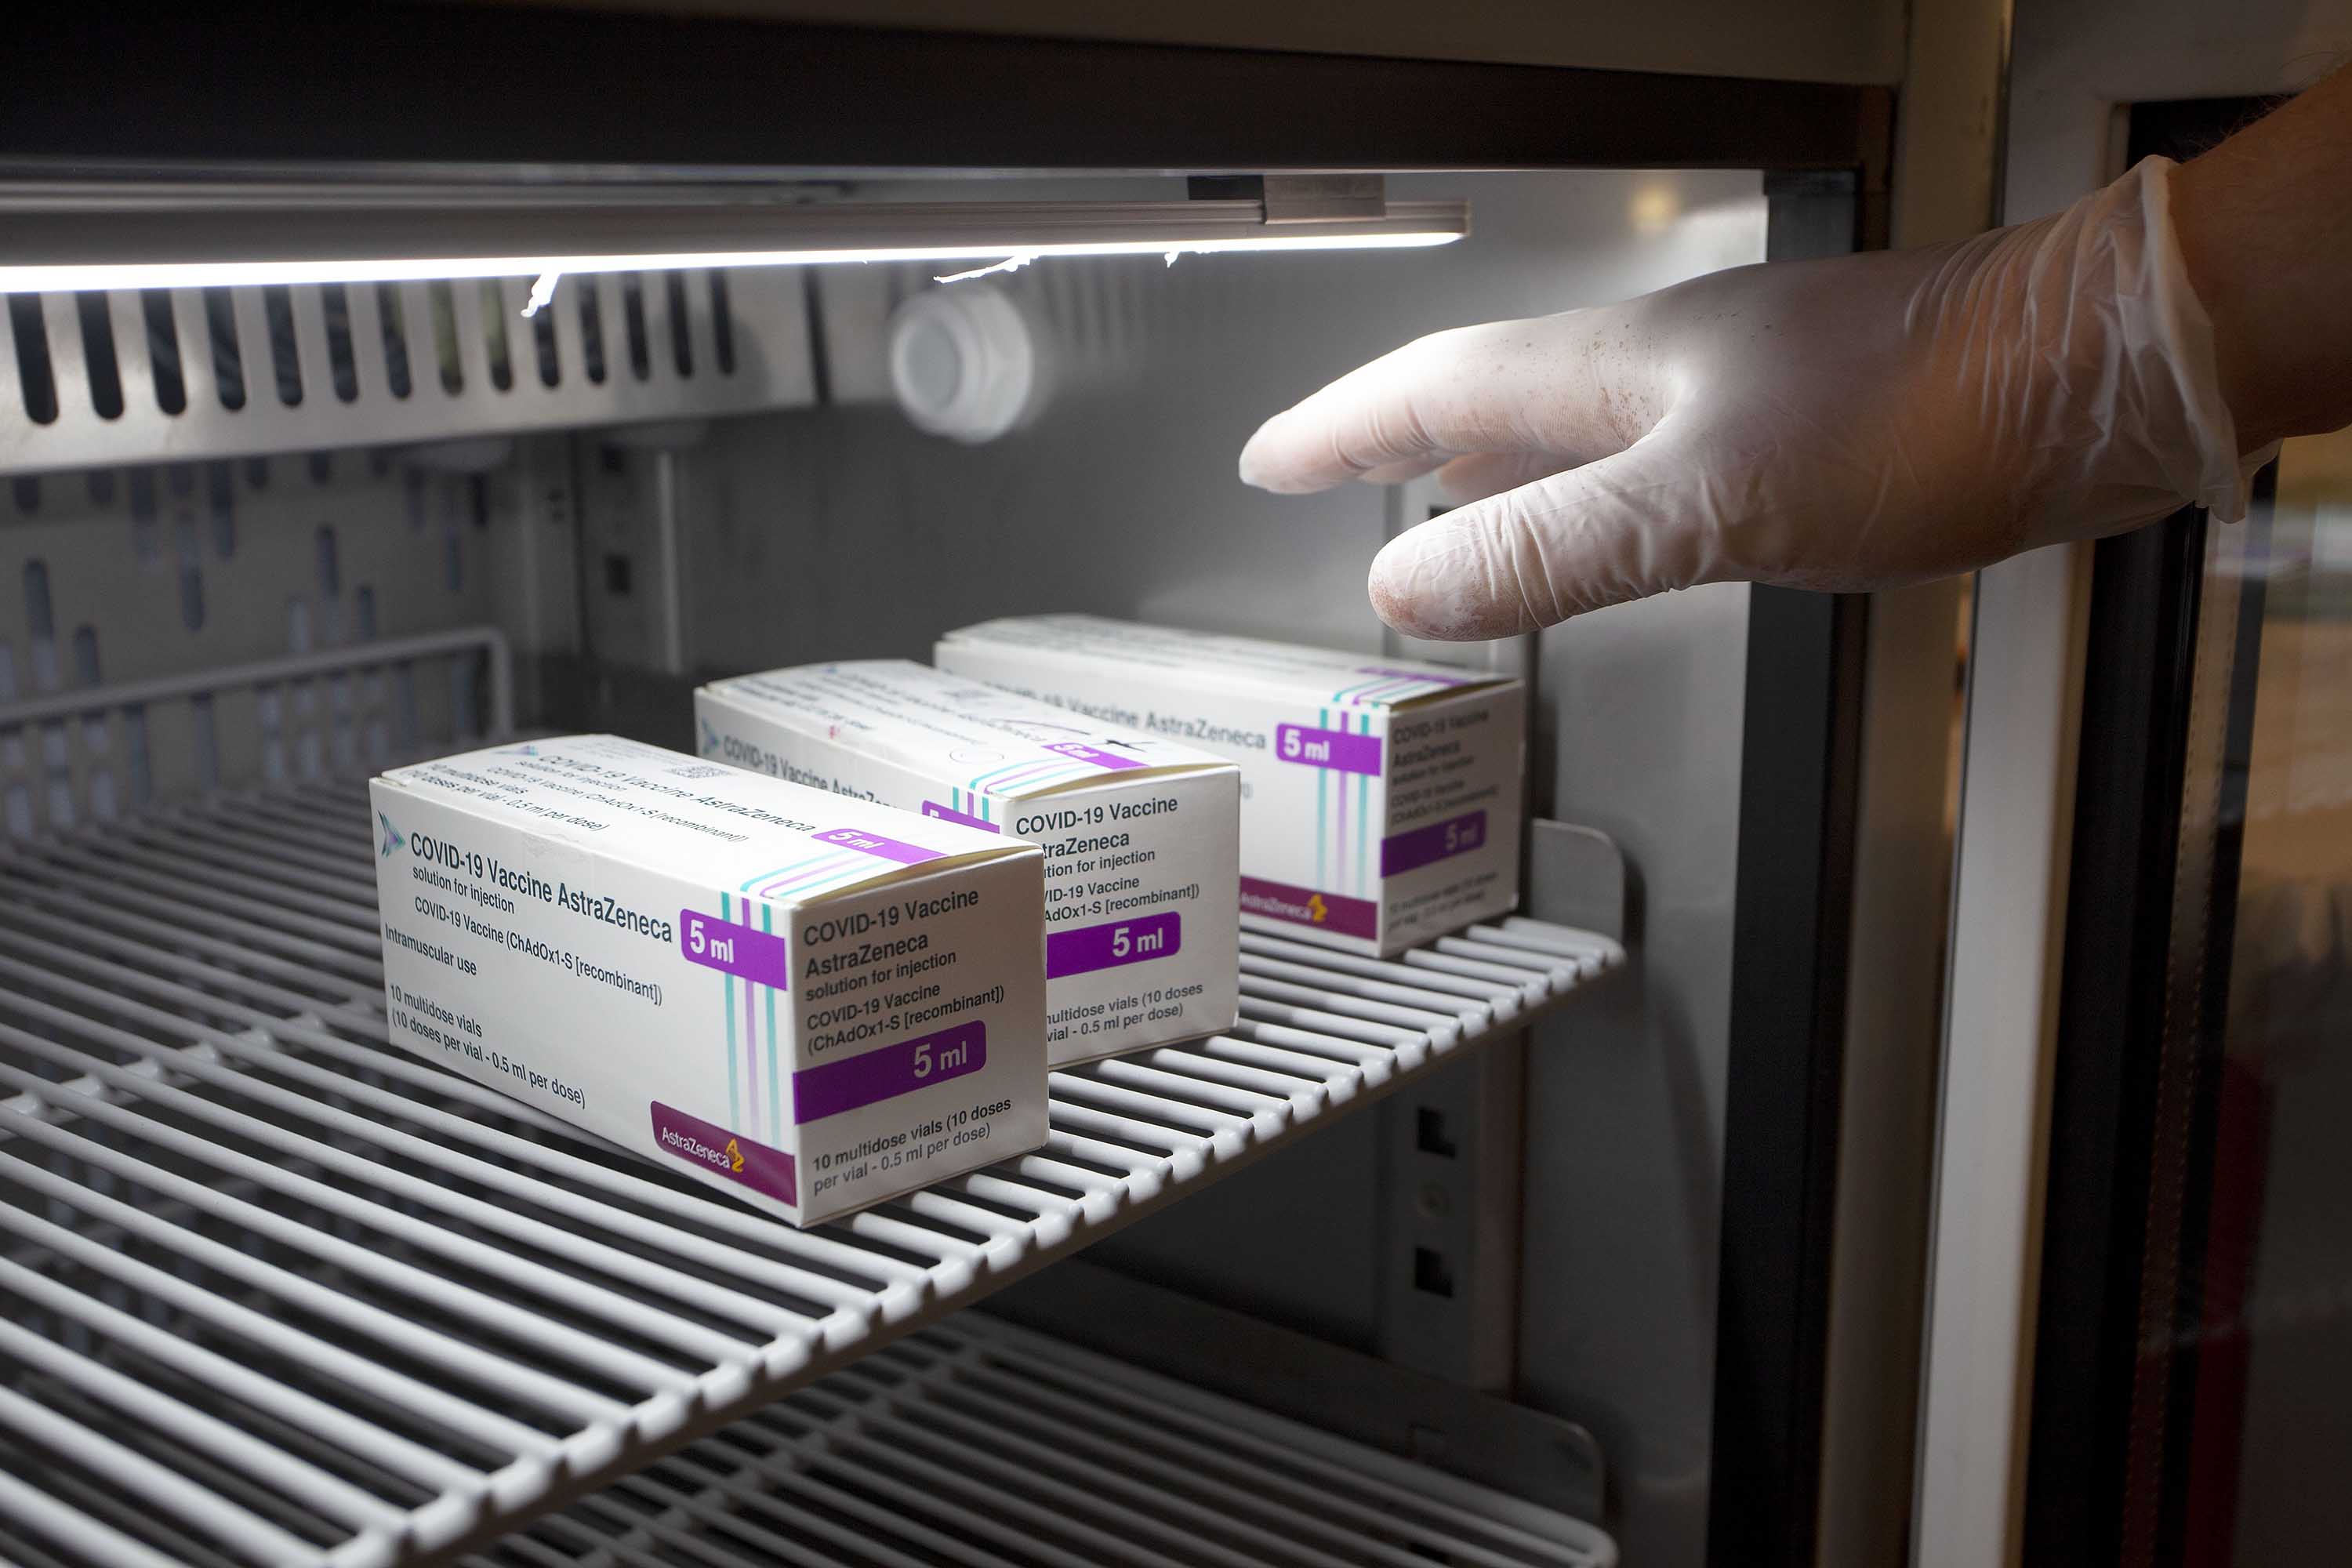 Boxes containing doses of the Astrazeneca vaccine are pictured inside a refrigerator in Bari, Italy, on March 9. 